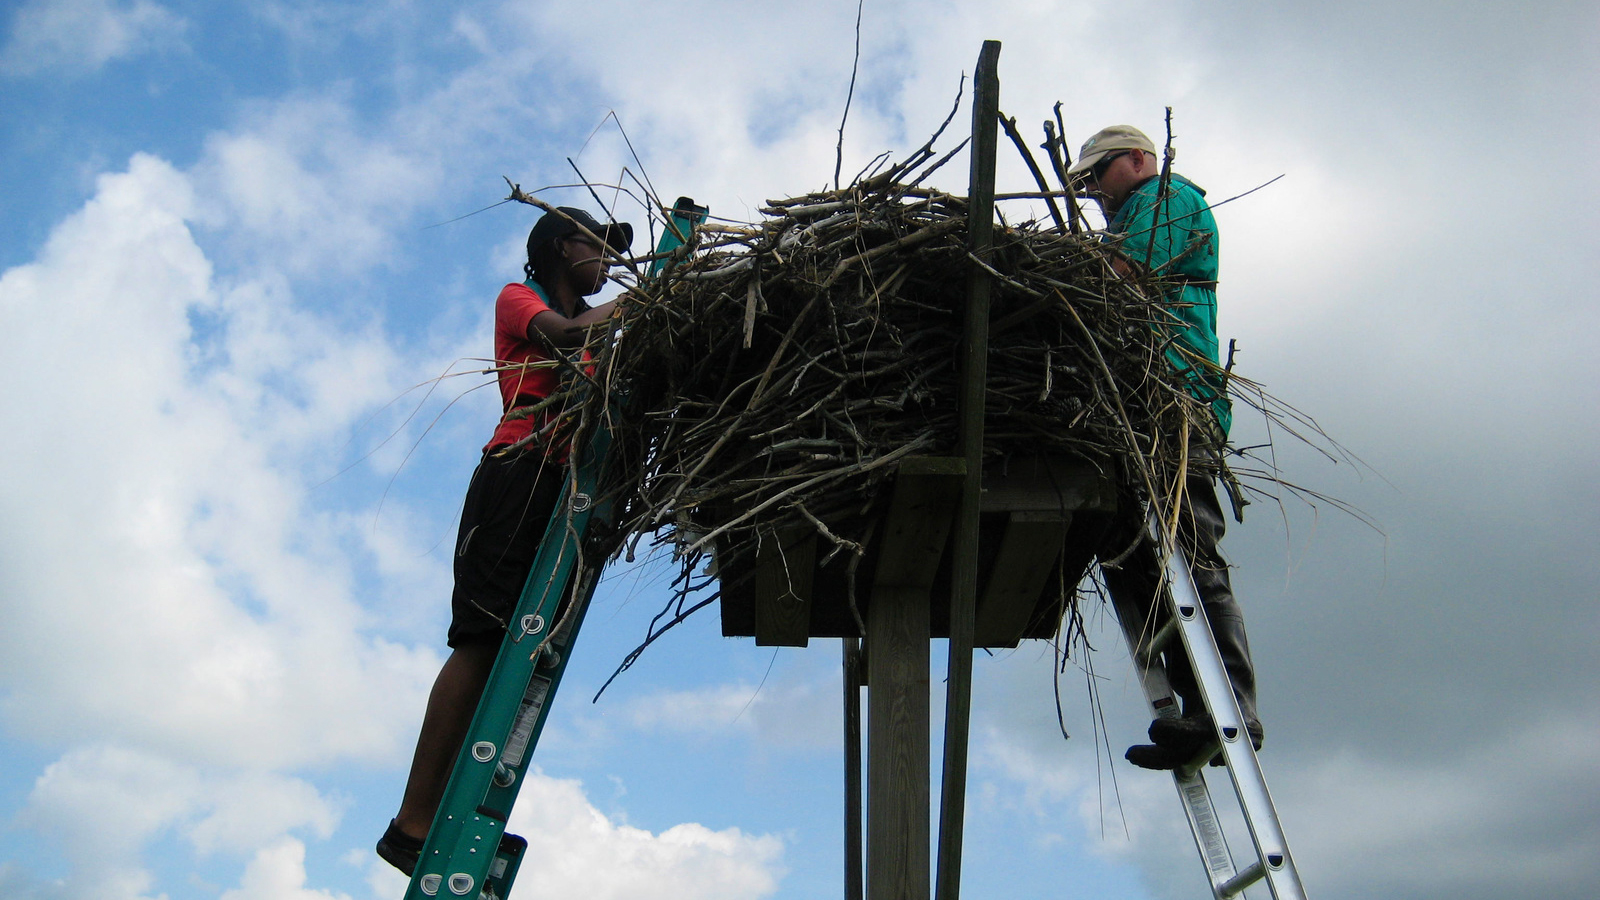 View of an artificial osprey platform. Photo © The Nature Conservancy 